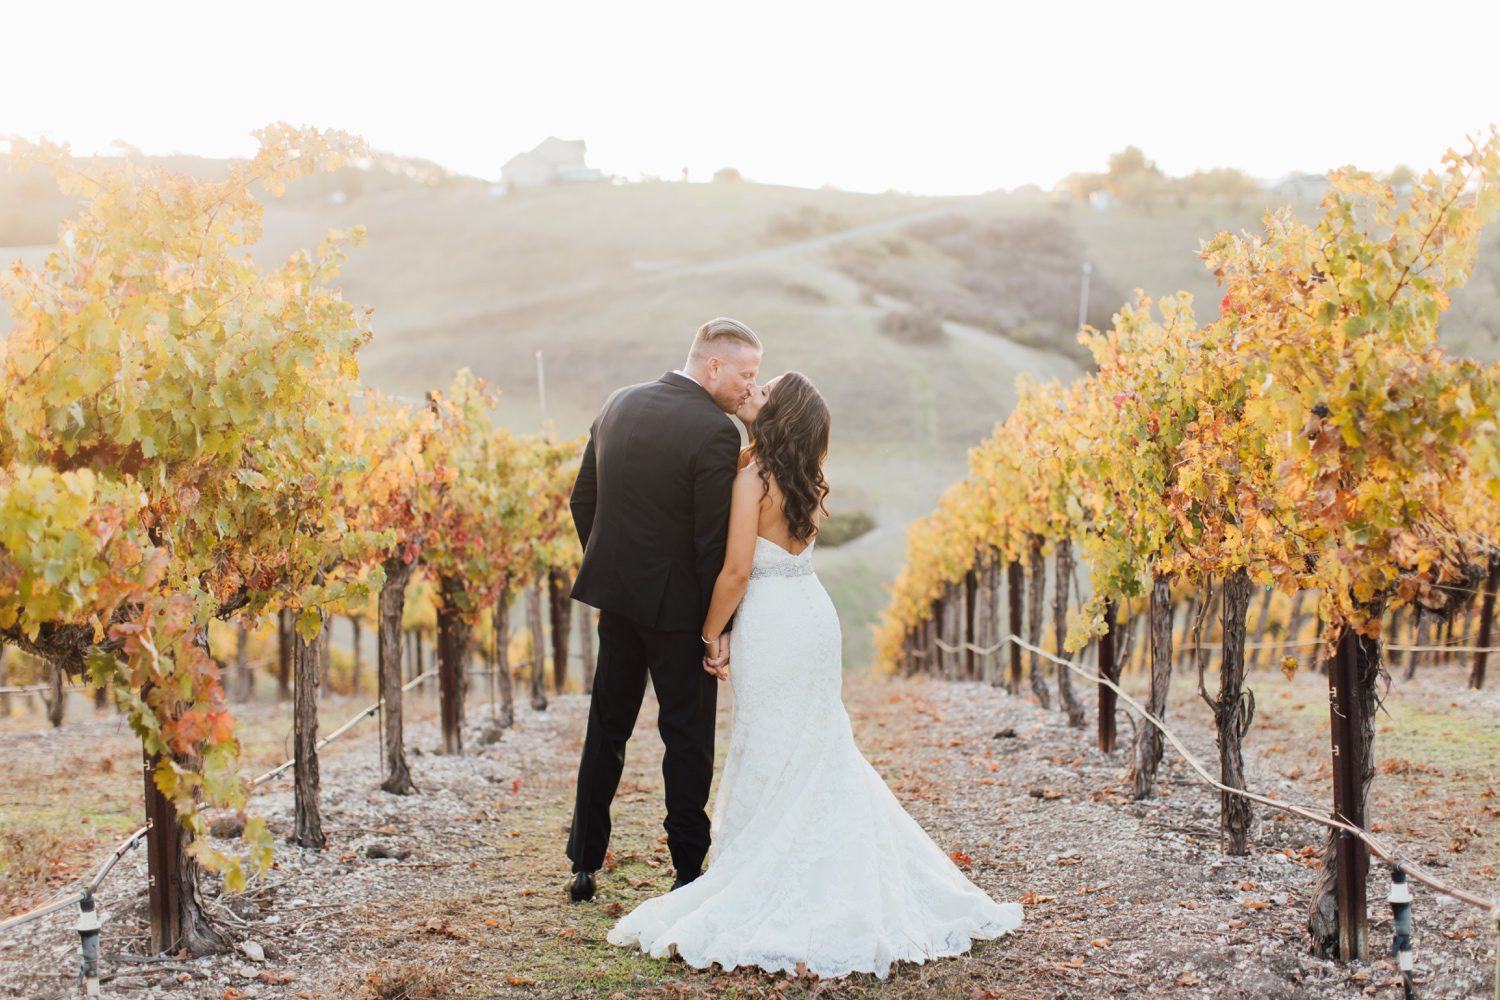 sunset photos of bride and groom at european chateau inspired wedding in Paso Robles by wine country photographer Jessica Sofranko